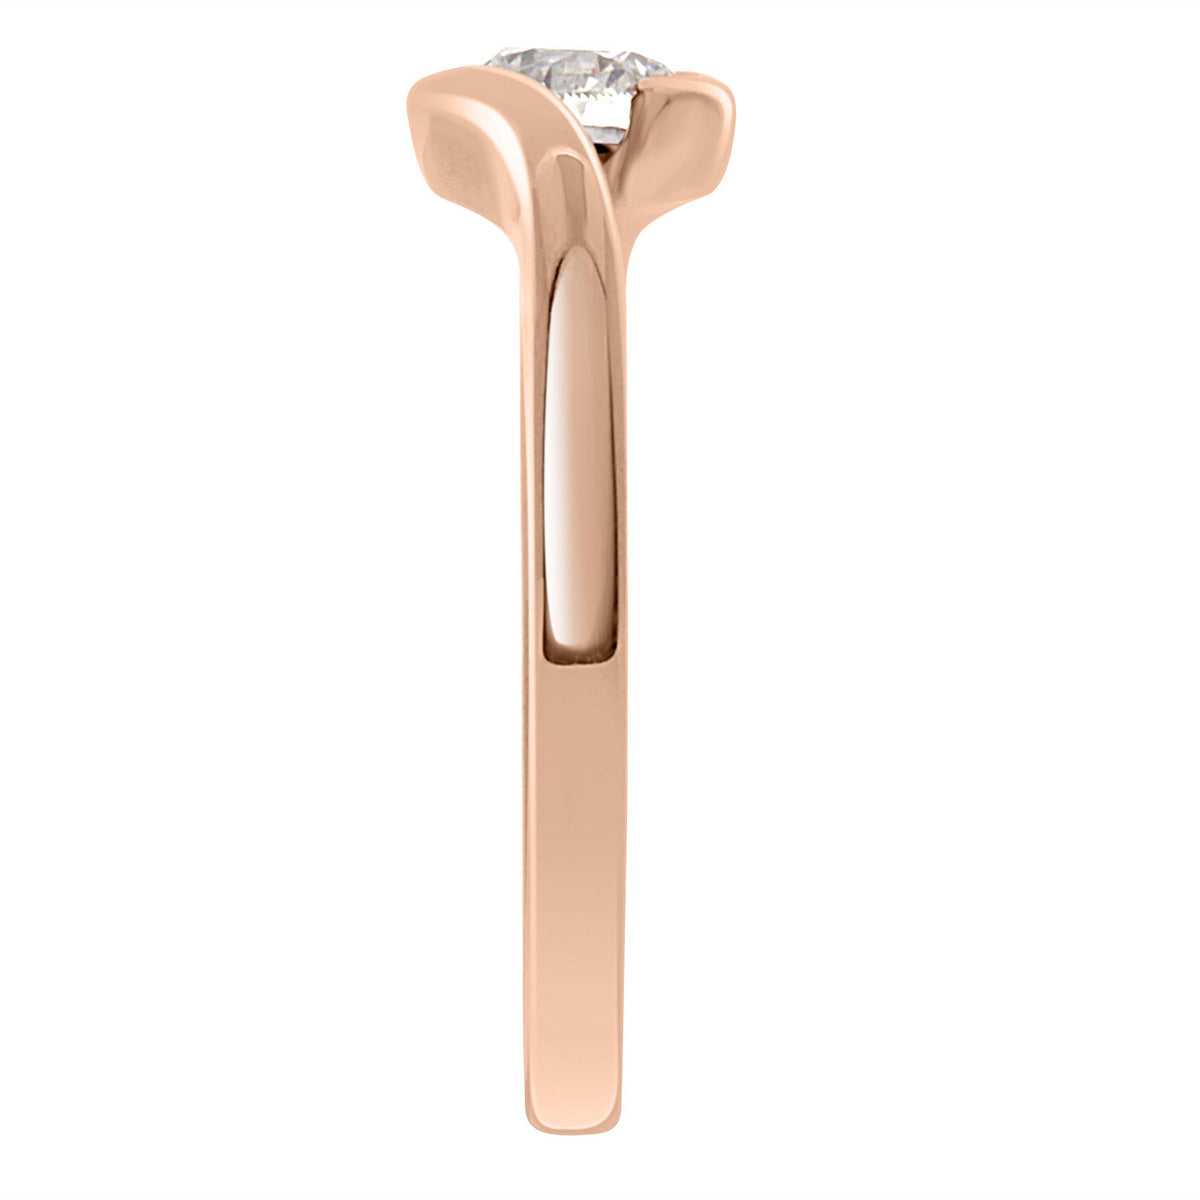 Tension Set Diamond Ring made in rose gold standing upright